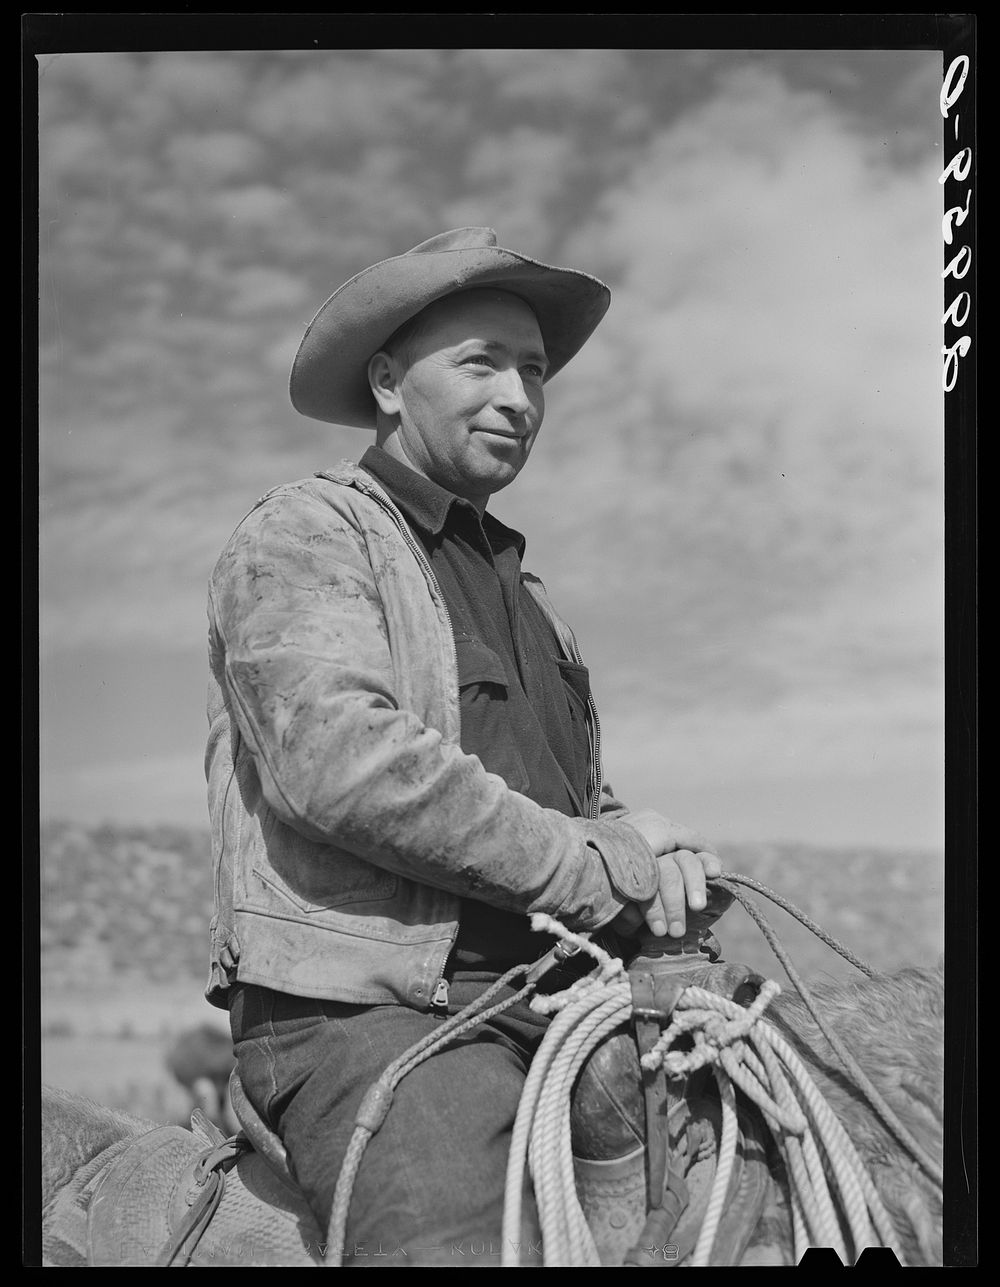 Cowhand. Elko County, Nevada. Sourced from the Library of Congress.